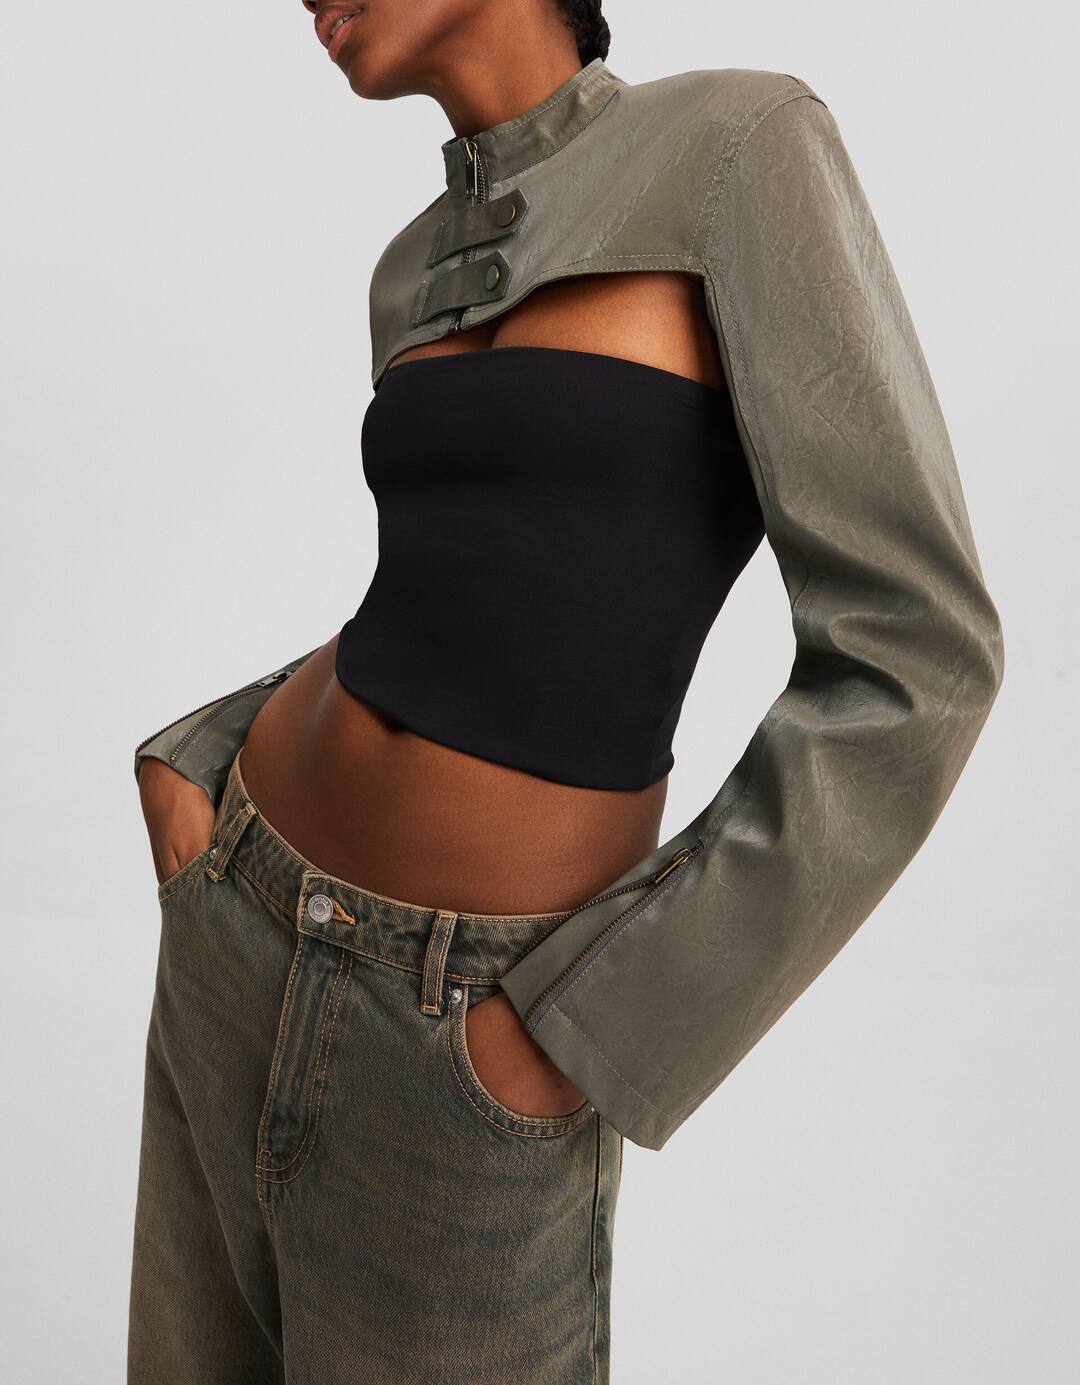 Cropped arm warmers with buckle detail